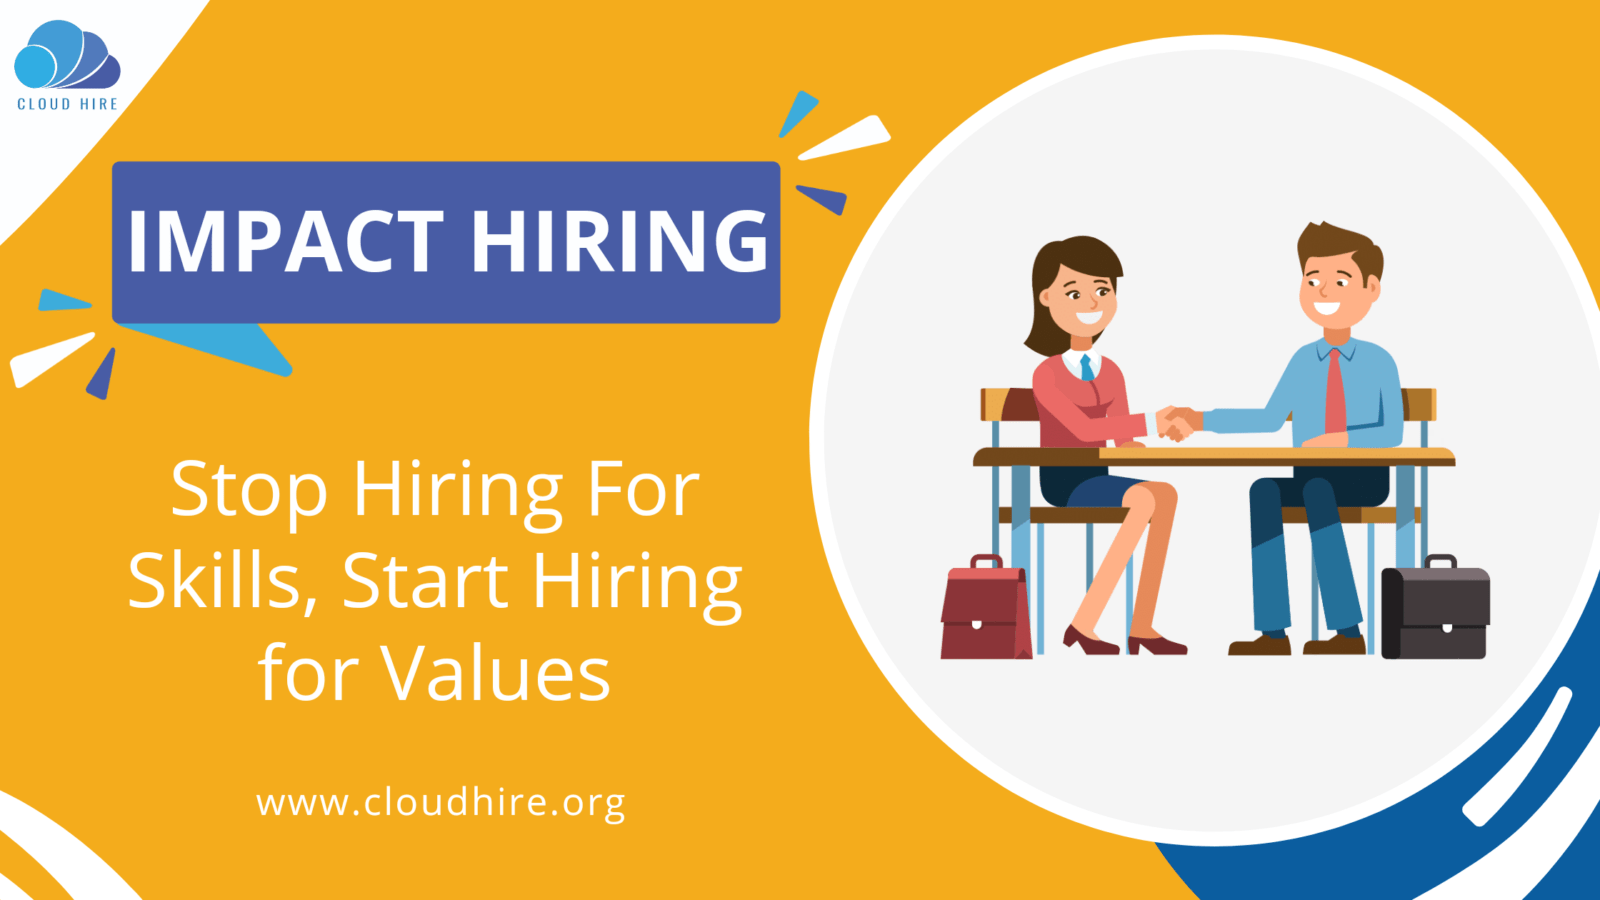 Impact Hiring: Hiring for Values to Guide Your Business